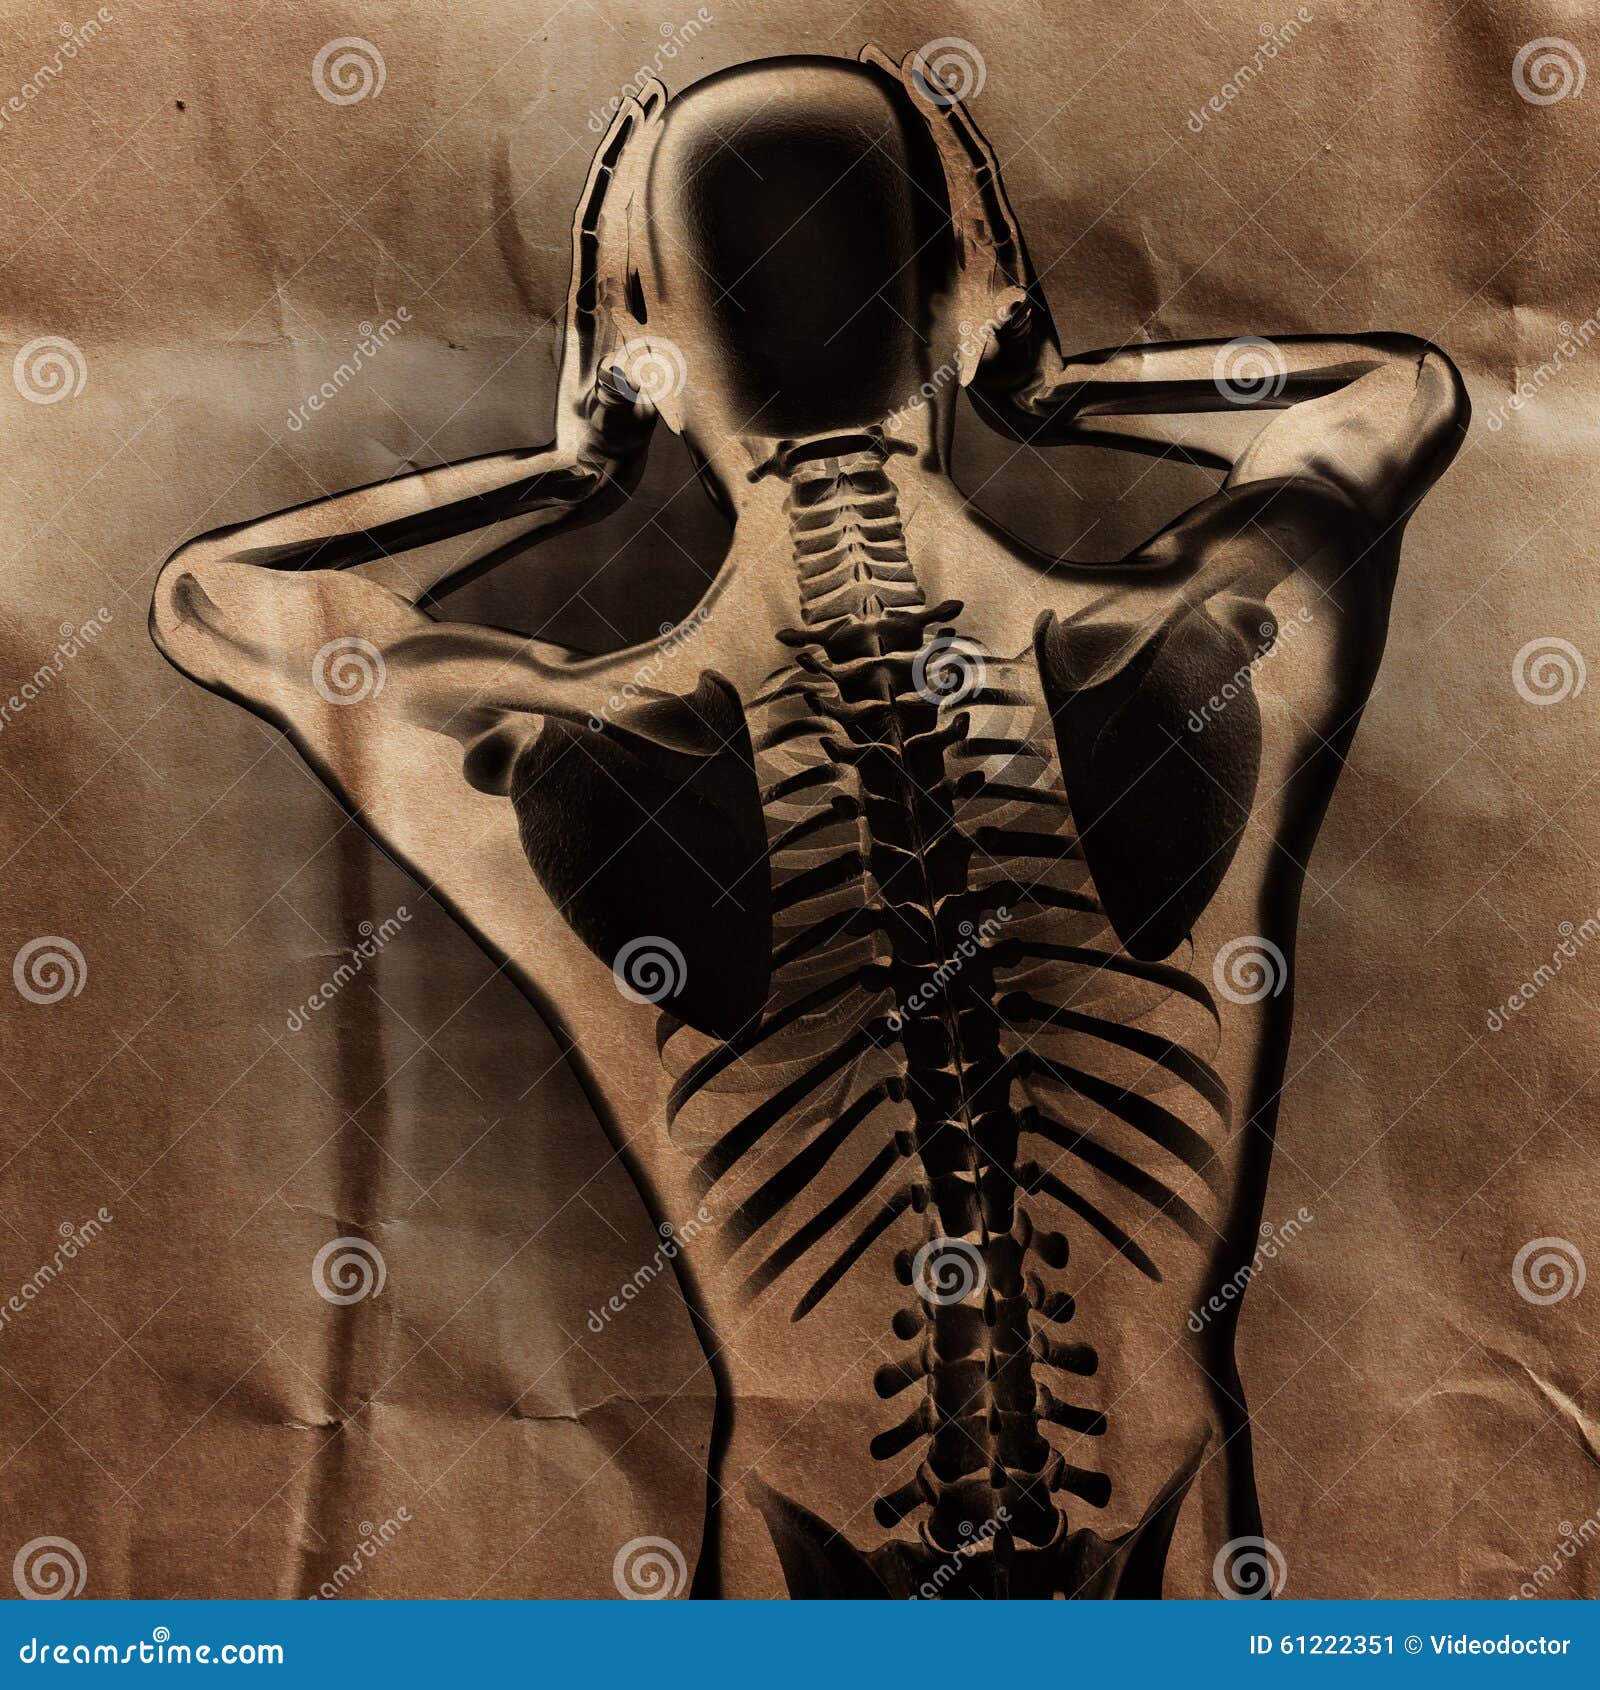 Human radiography scan with bones painted on paper